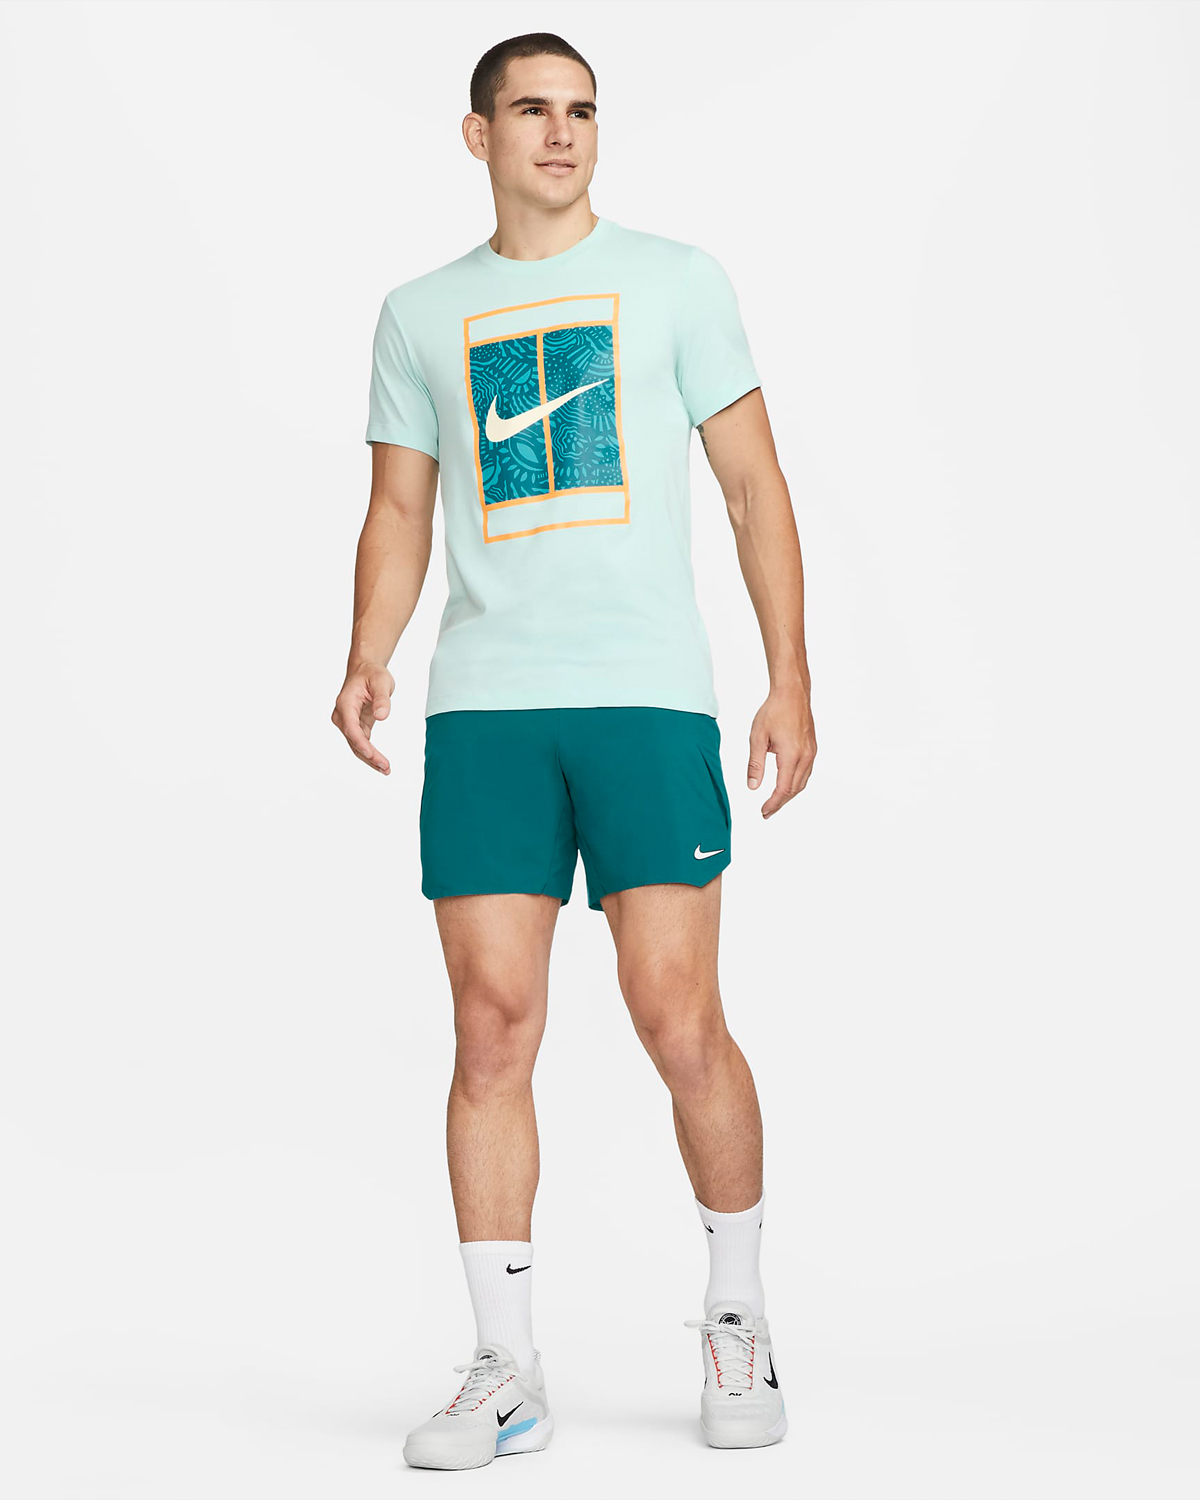 Nike-Court-Tennis-Shorts-Geode-Teal-Outfit